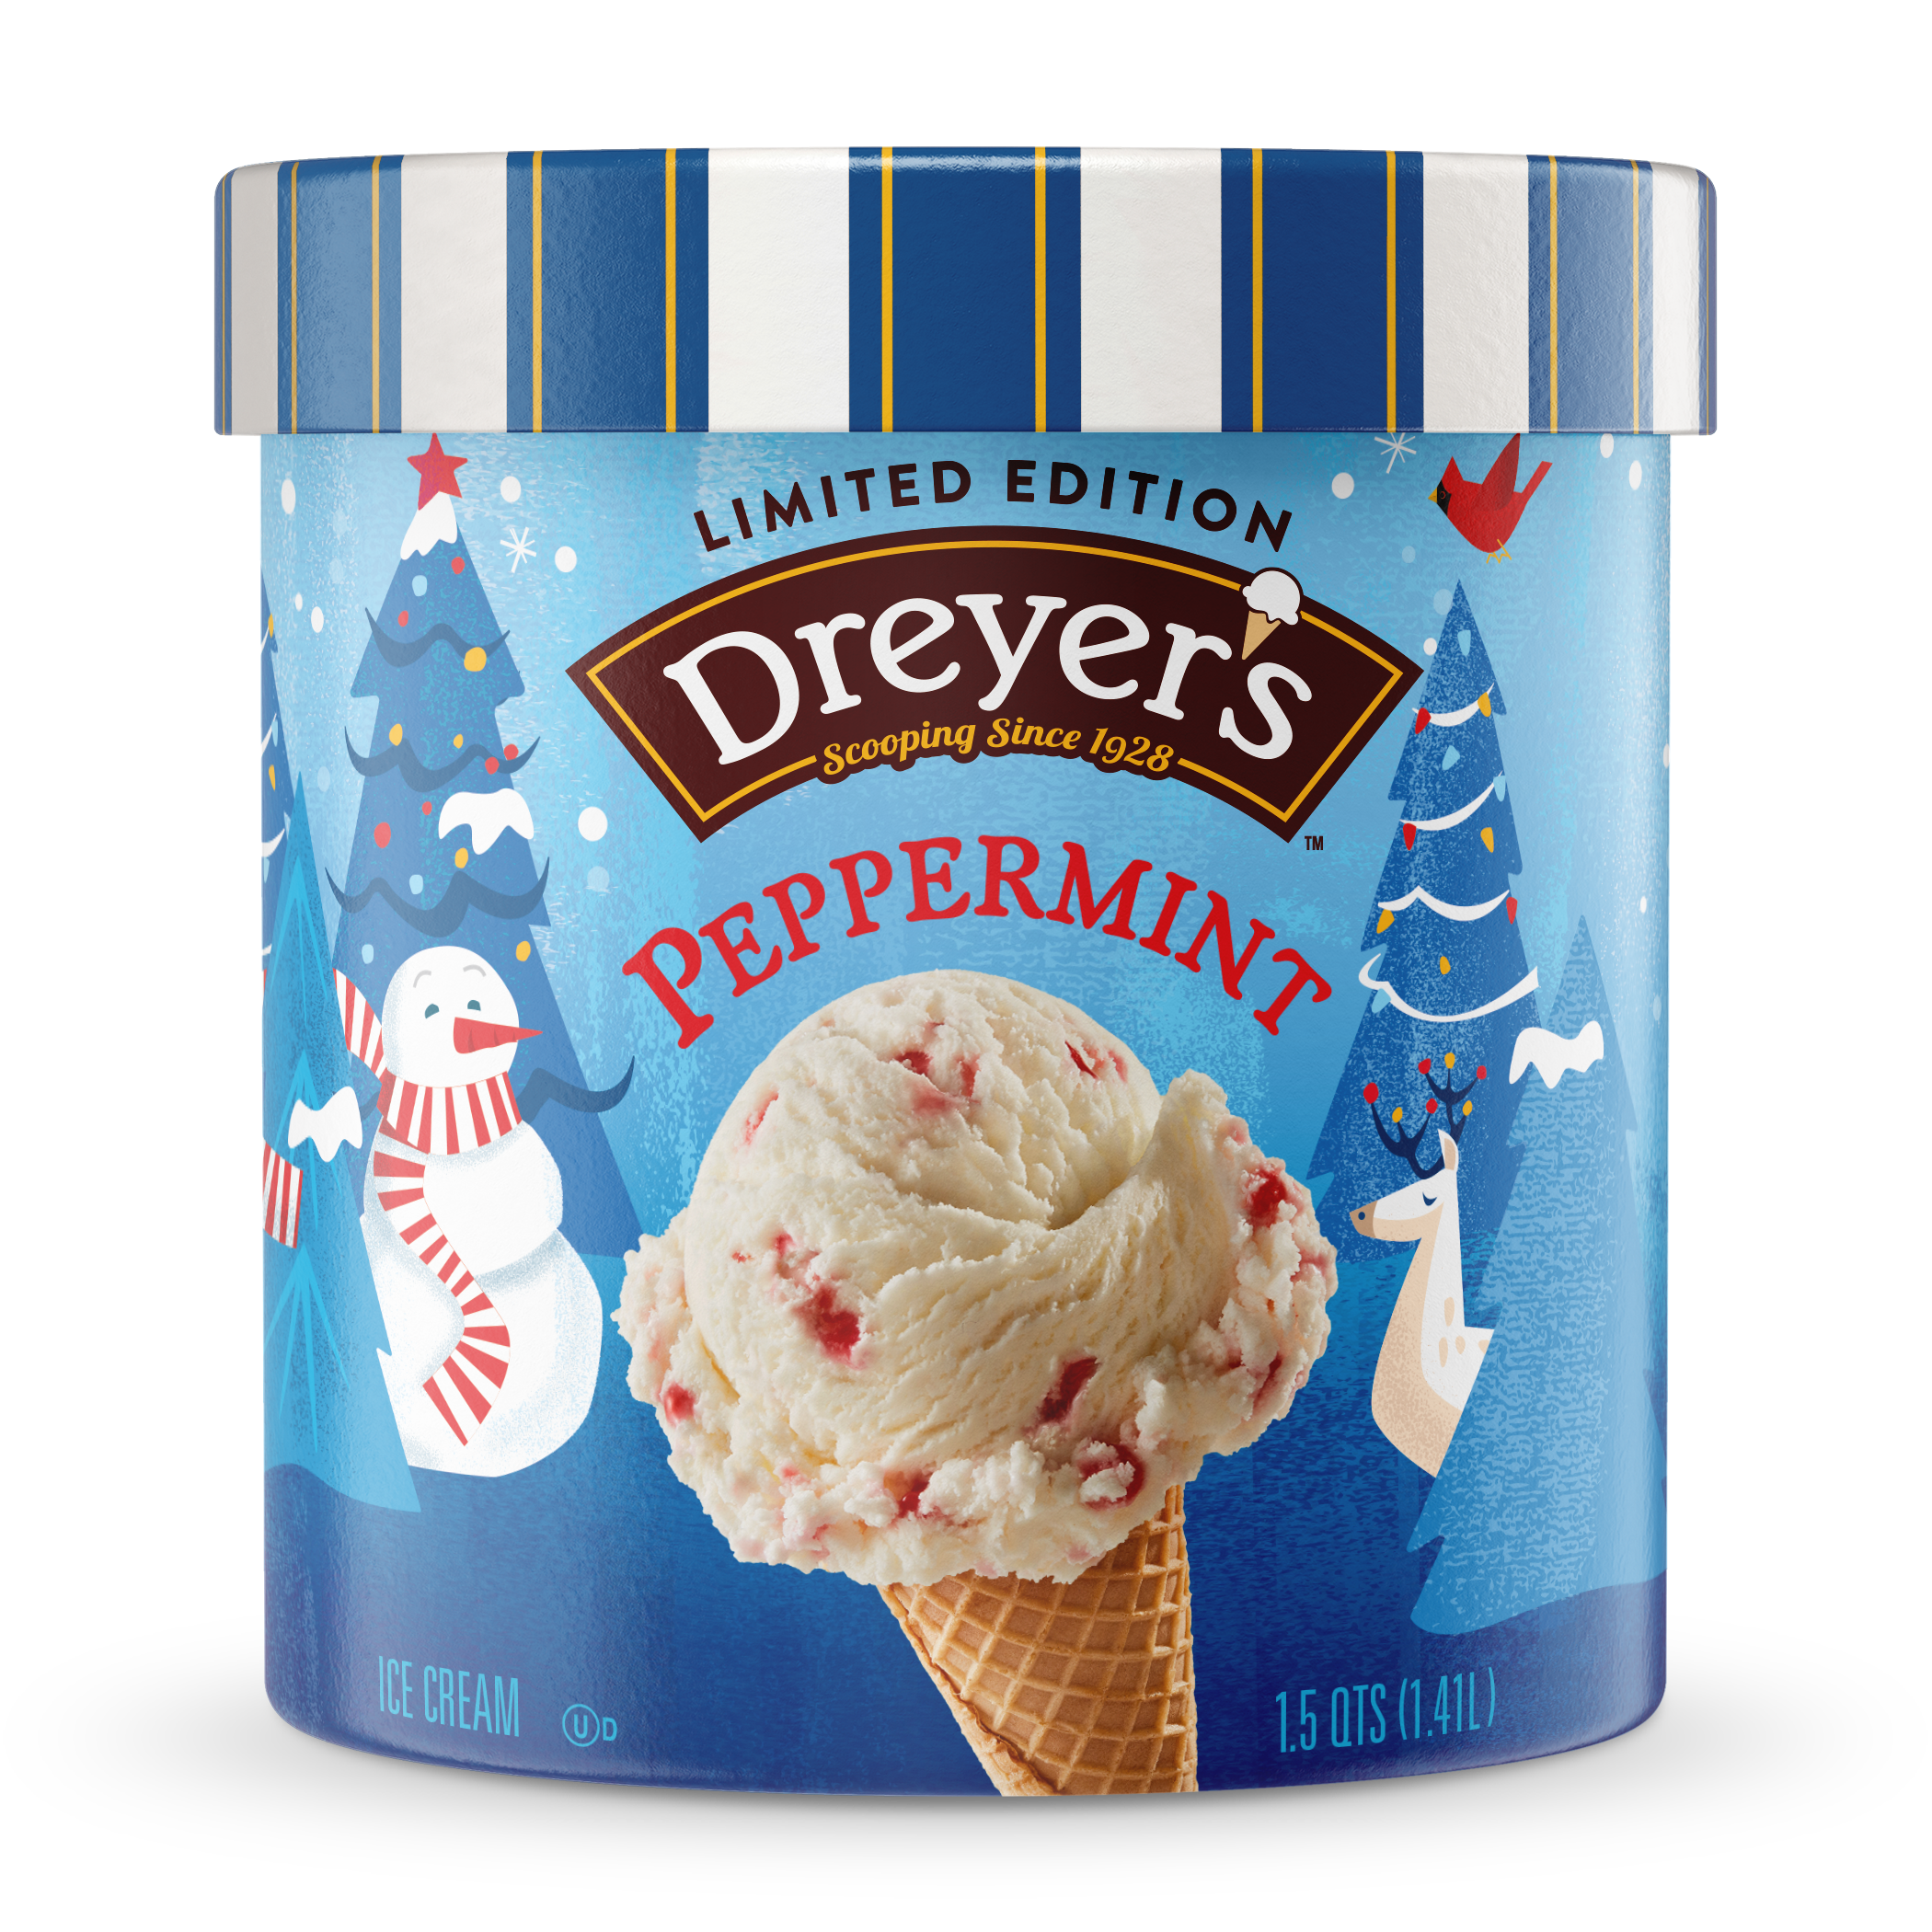 Carton of Dreyer's limited edition peppermint ice cream